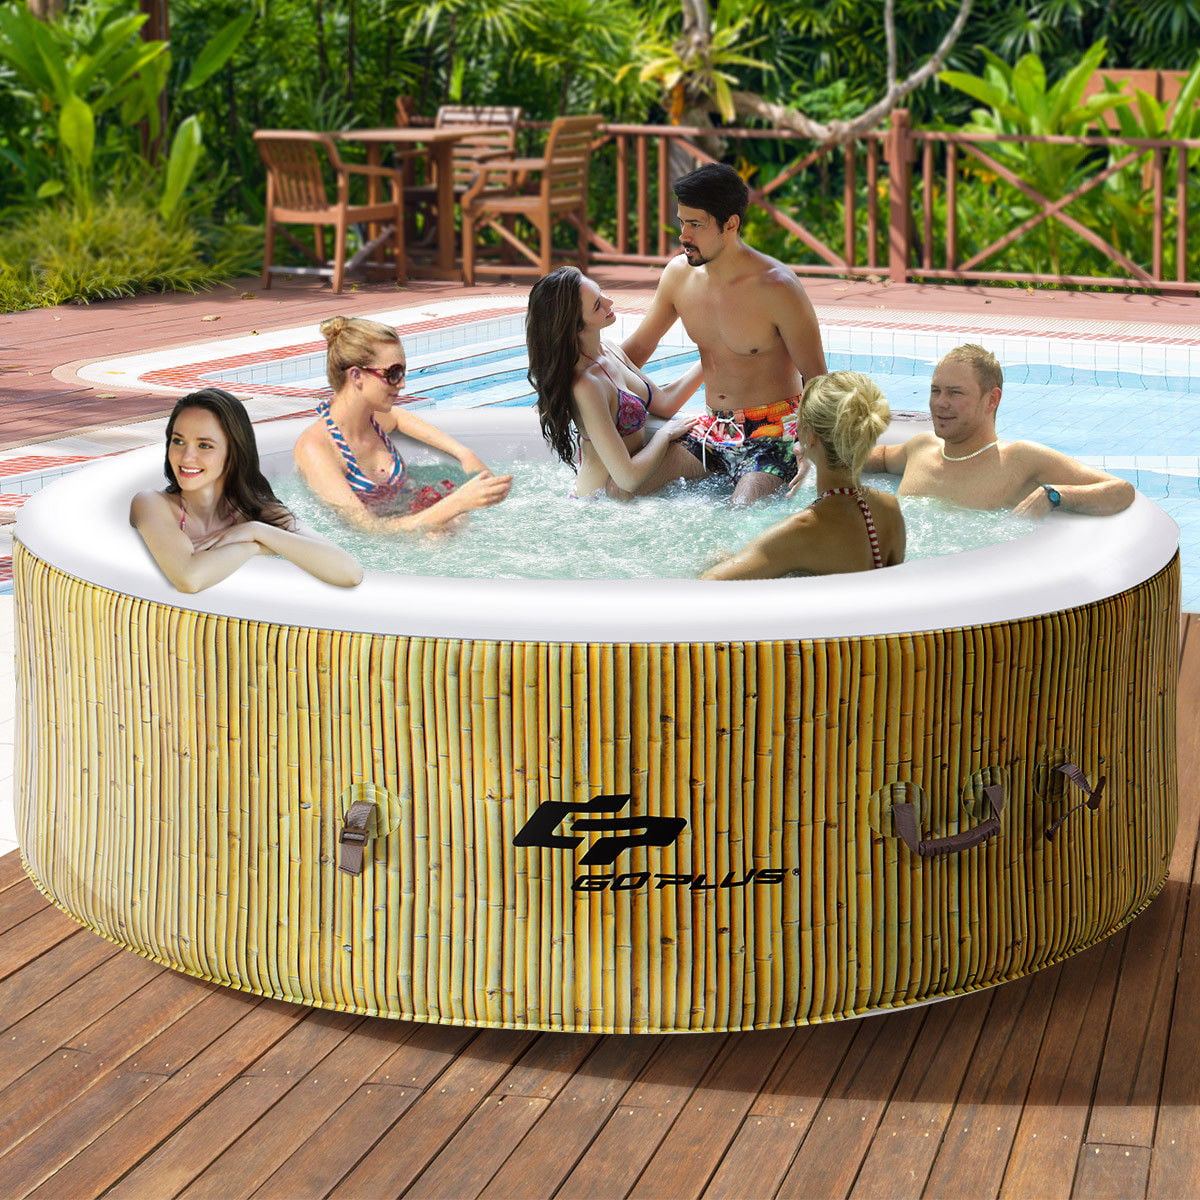 New 6 Person Inflatable Hot Tub Outdoor Portable Jacuzzi Jets Bubble